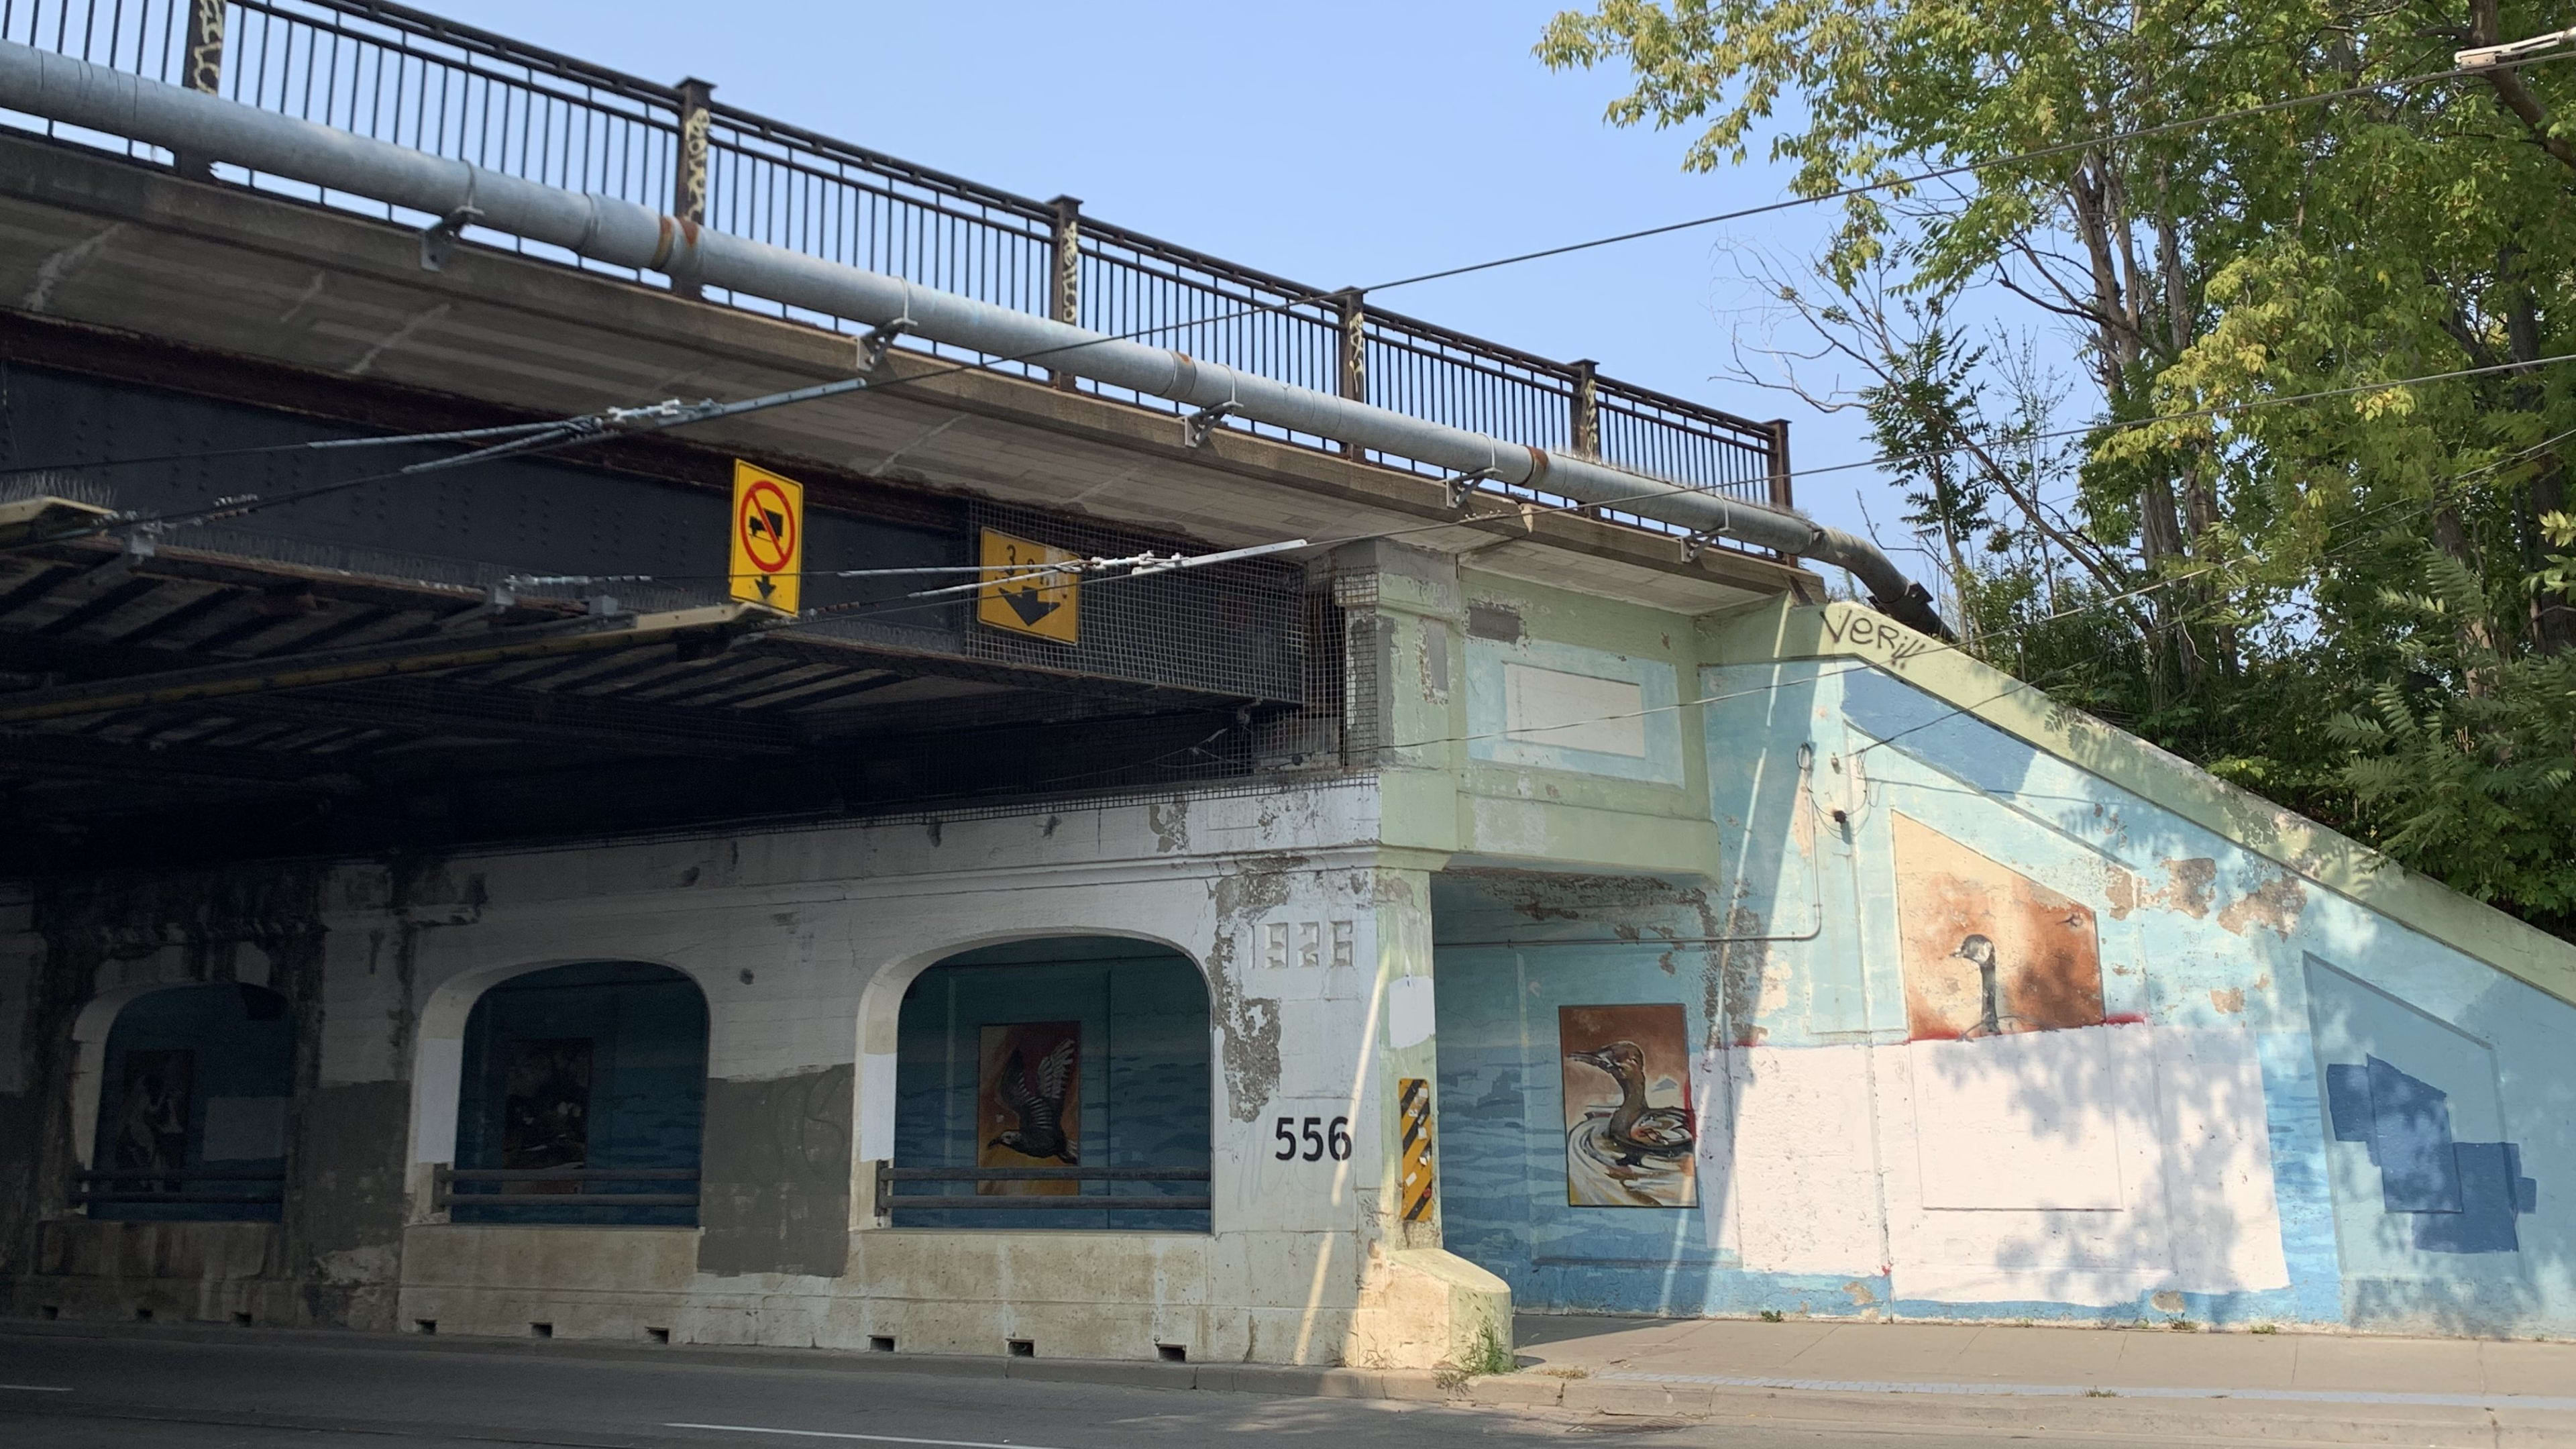 One of the many historic bridges along Queen Street in Toronto